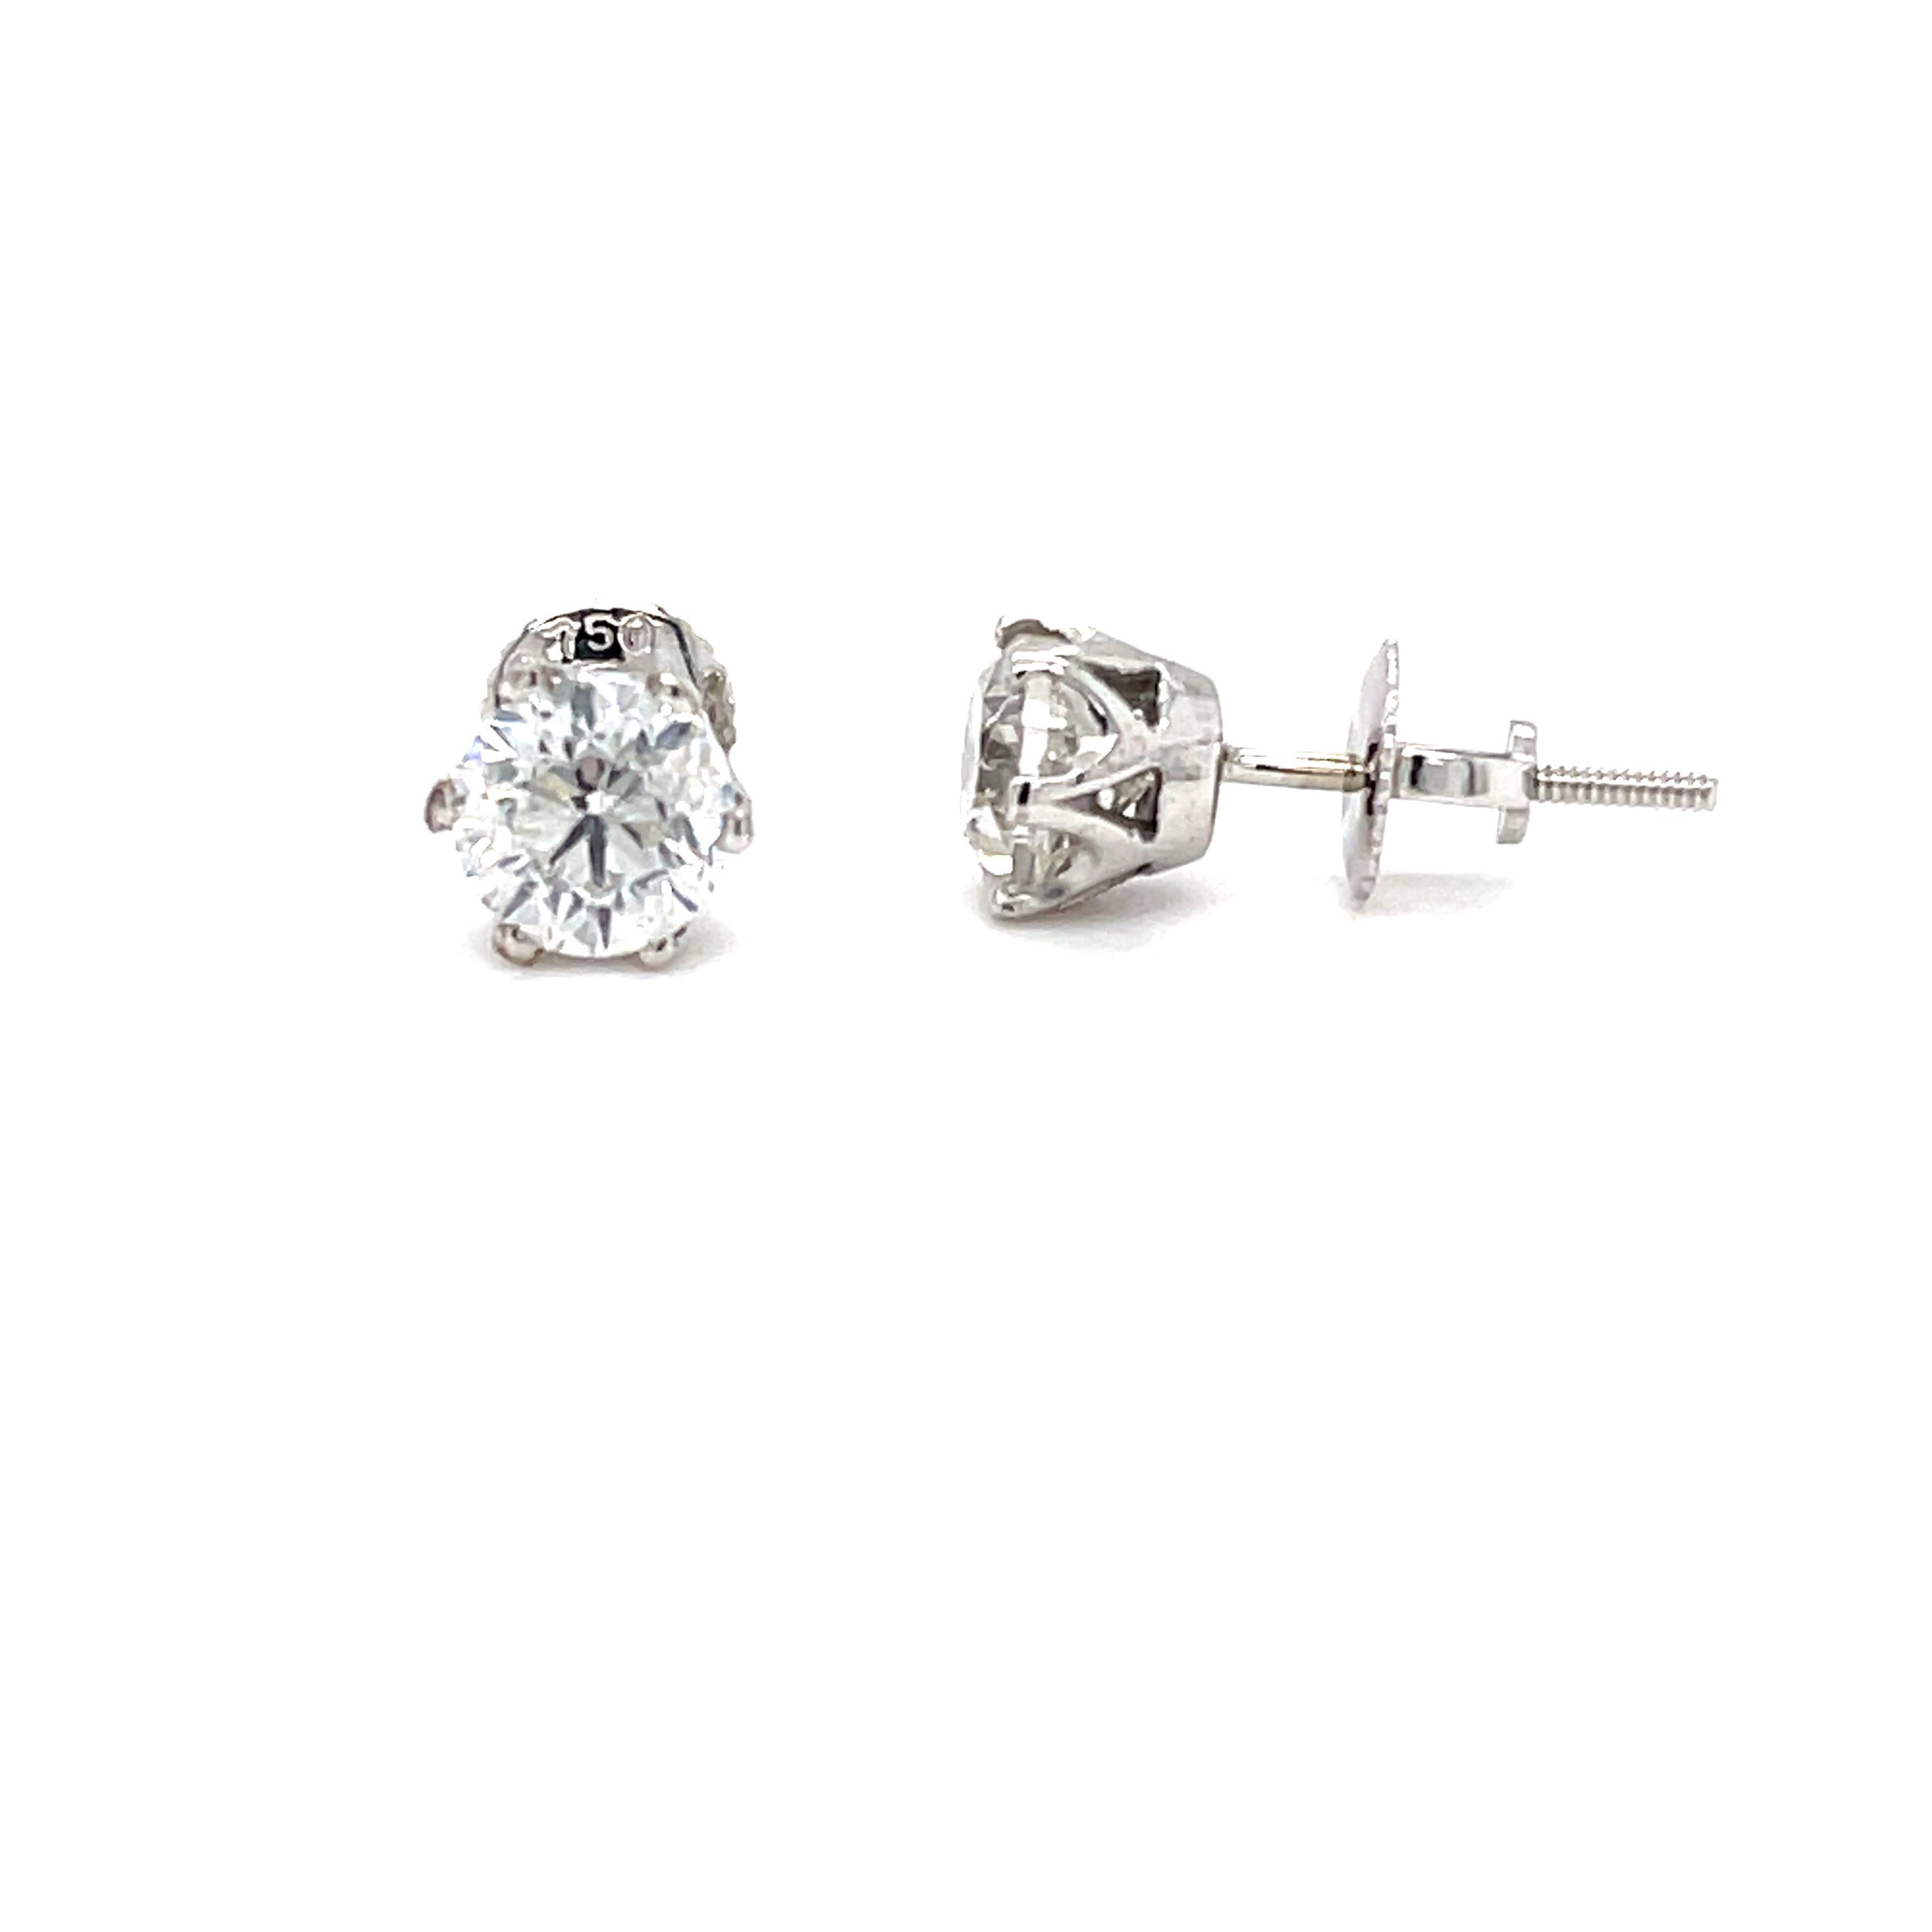 1.50ct Round Brilliant Cut Diamond Solitaire Stud Earrings 18ct White Gold SOLD